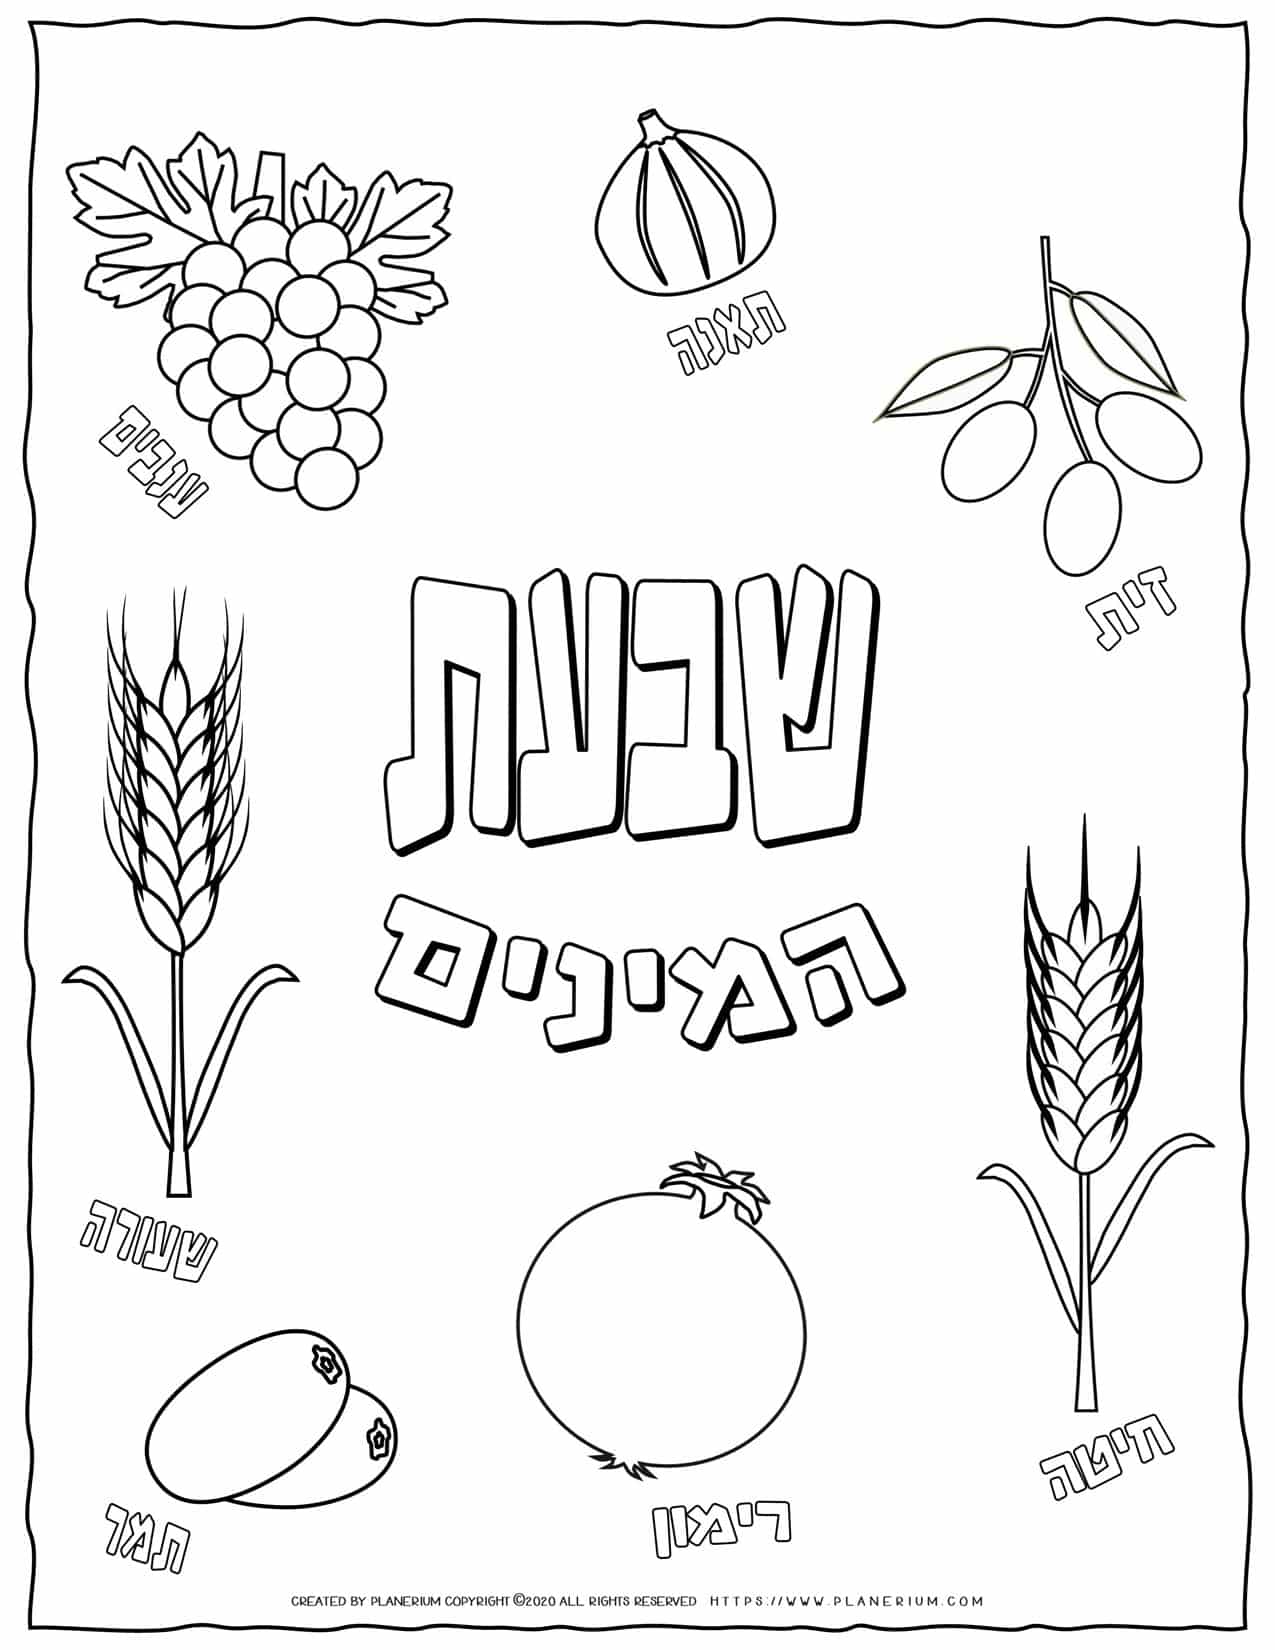 Shavuot Coloring Page - The Seven Species with Hebrew Titles | Planerium